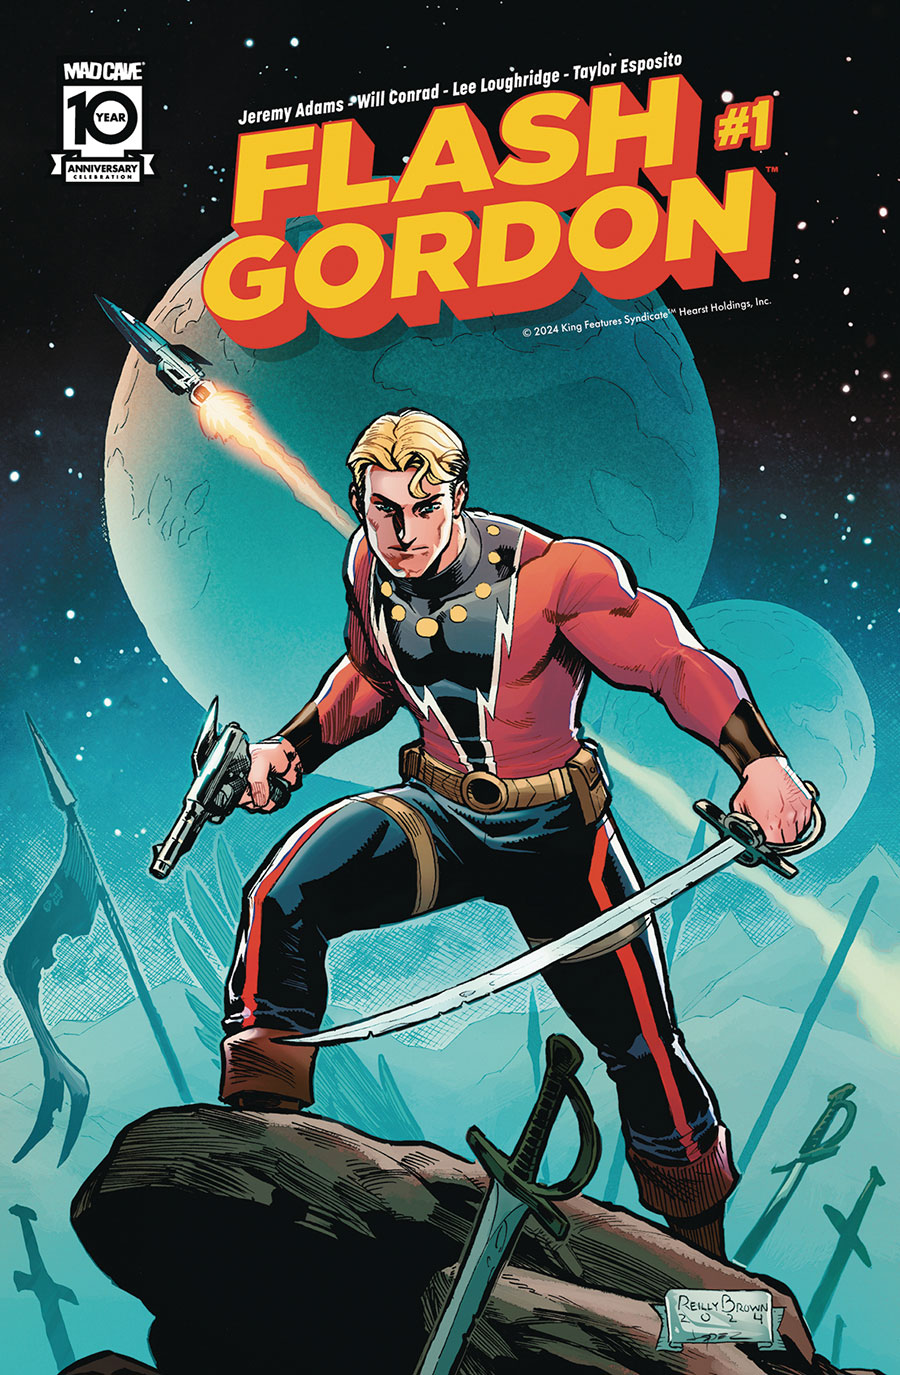 Flash Gordon Vol 8 #1 Cover C Variant Reilly Brown Cover